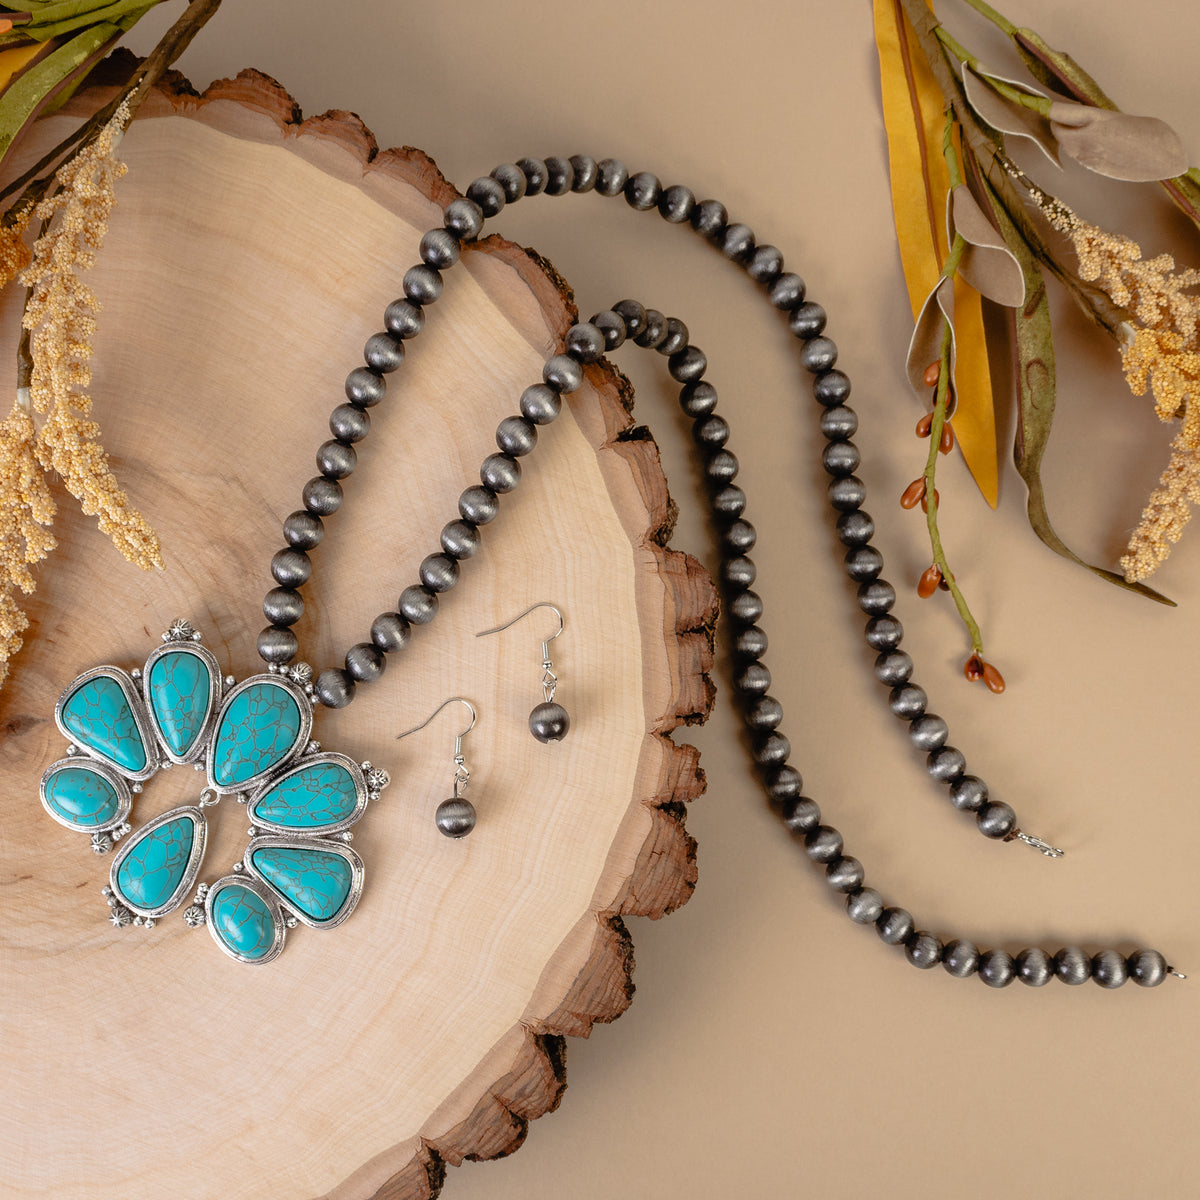 72945 - Squash Blossom Necklace - Turquoise & Silver